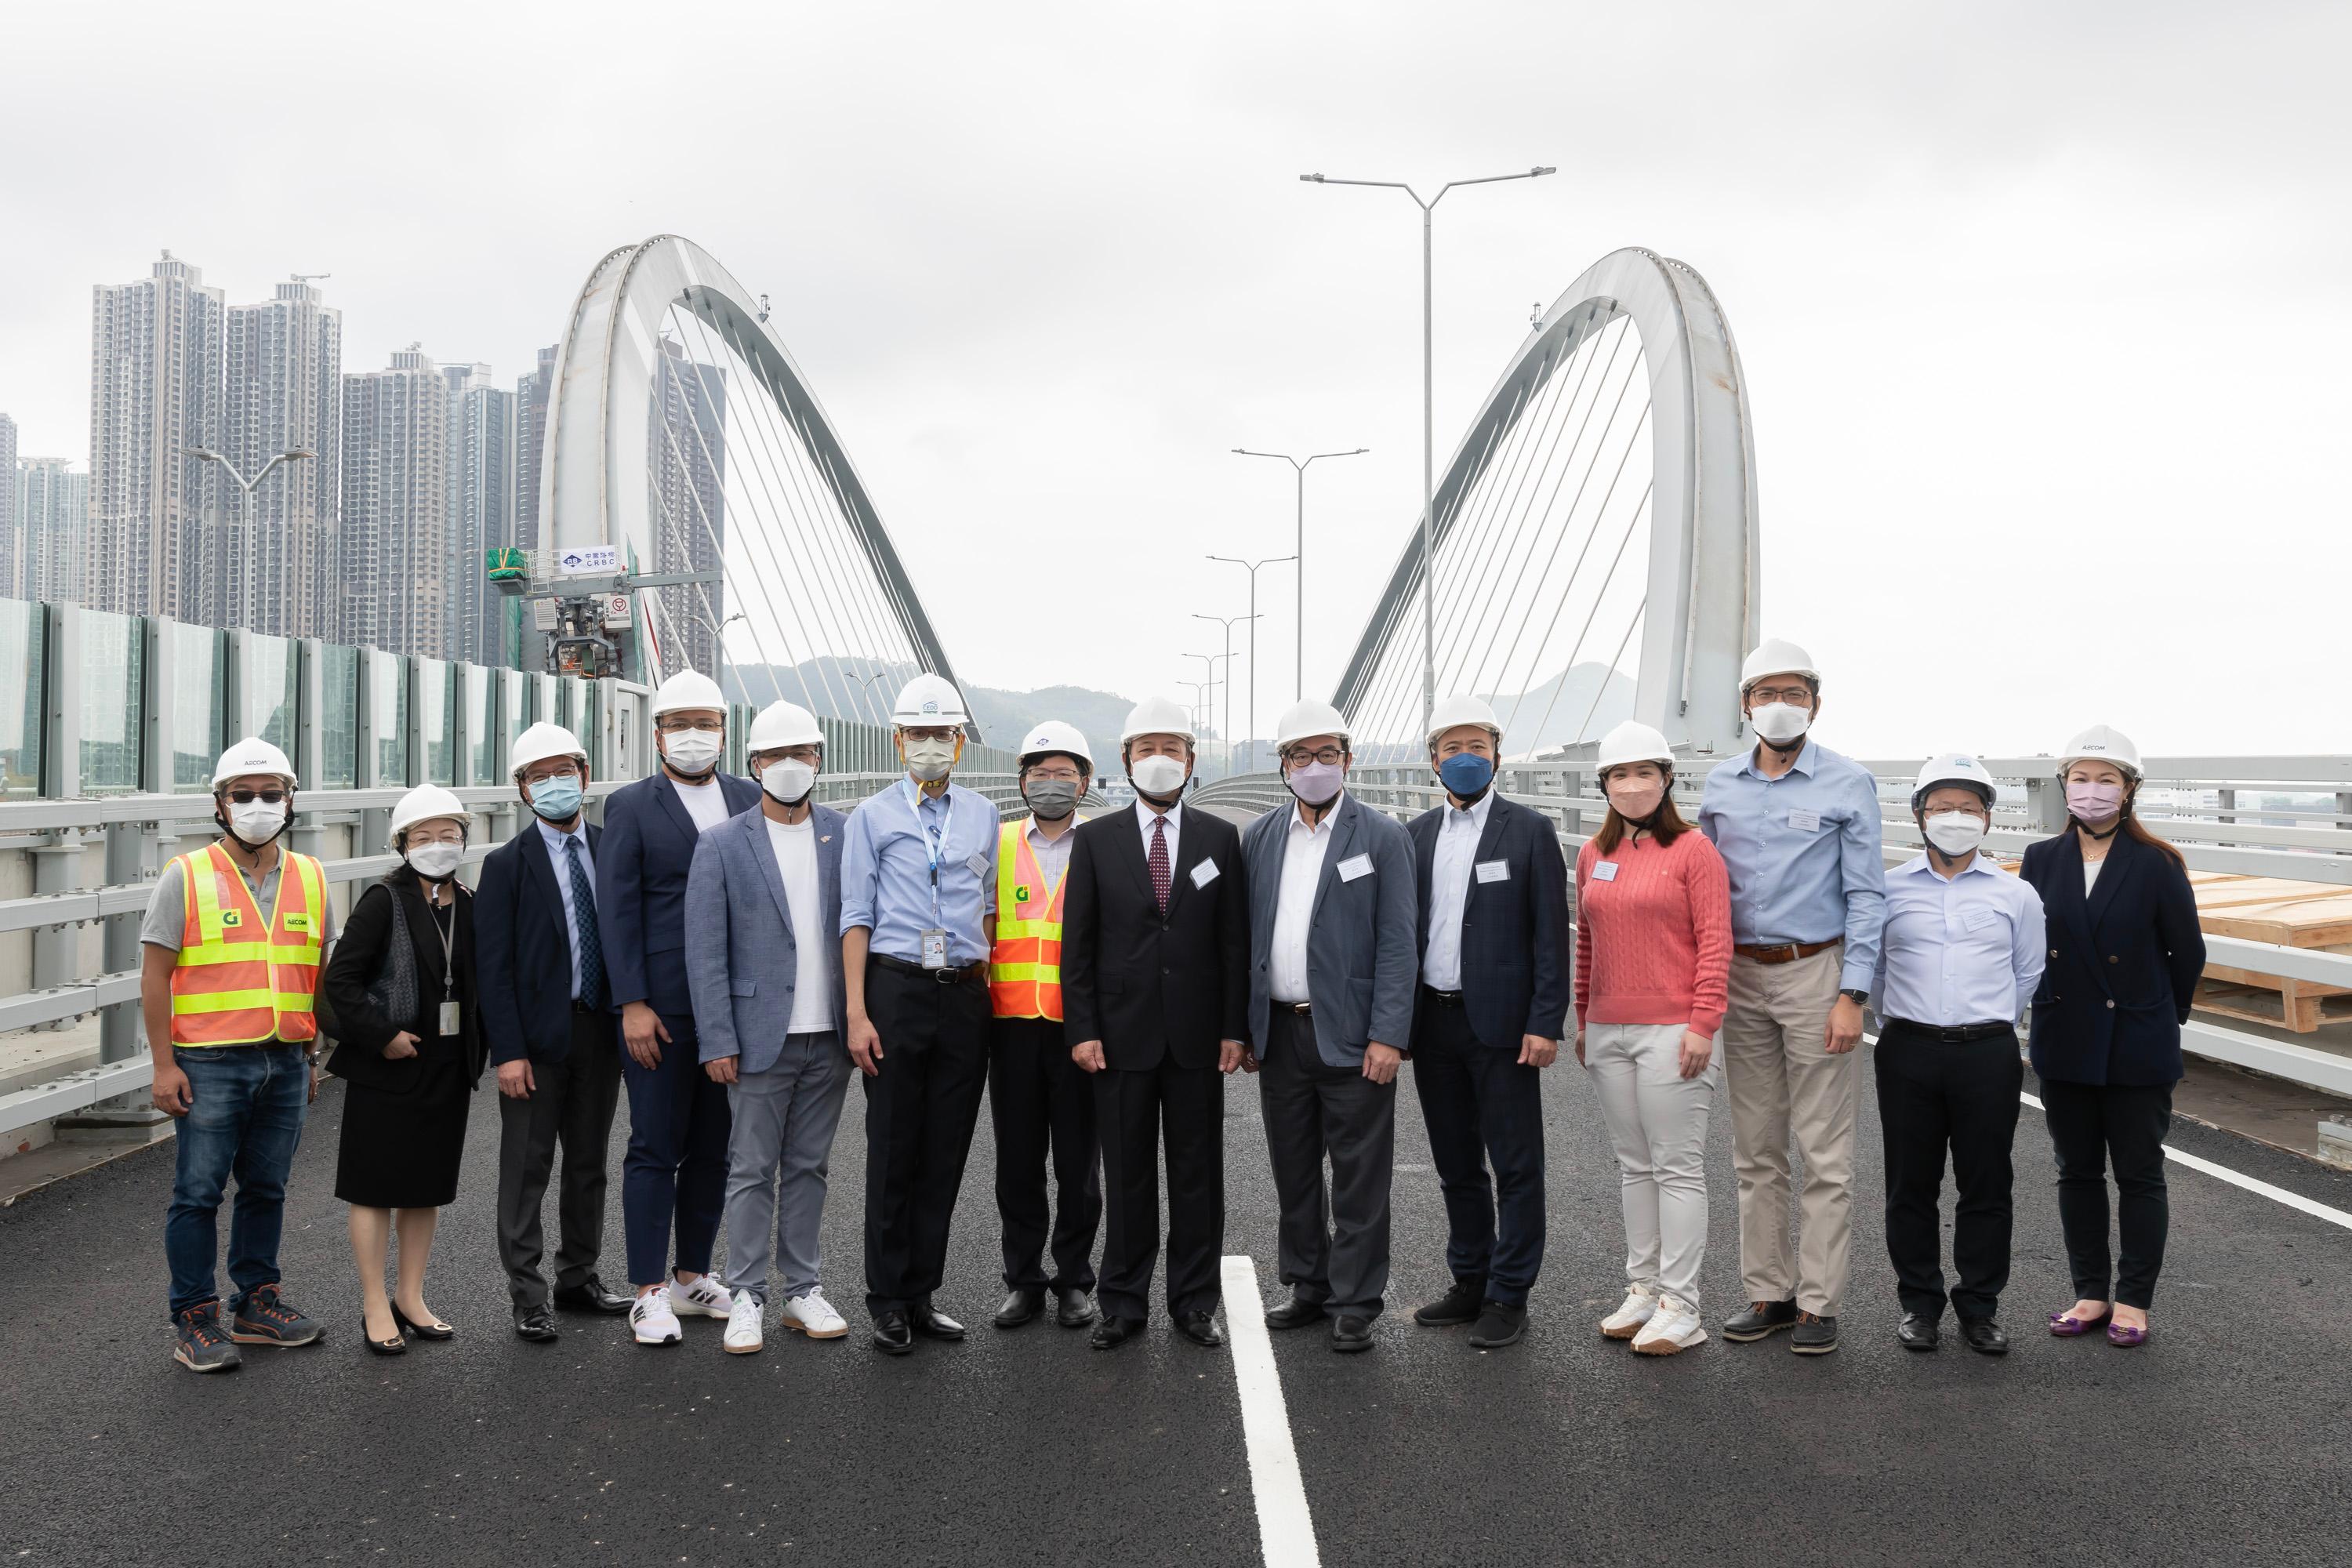 The Legislative Council (LegCo) Panel on Transport today (November 15) visited the Tseung Kwan O-Lam Tin Tunnel (TKO-LT Tunnel) and Cross Bay Link, Tseung Kwan O. Photo shows LegCo Members posing for a group photo with representatives of the Government and the construction contractor on the marine viaduct of the Cross Bay Link, Tseung Kwan O, namely Mr Tony Tse (third left), Mr Stanley Li (fourth left), Mr Ngan Man-yu (fifth left), Mr Frankie Yick (seventh right), Ir Dr Lo Wai-kwok (sixth right), Mr Yiu Pak-leung (fifth right), Ms Lam So-wai (fourth right) and Mr Luk Chung-hung (third right).